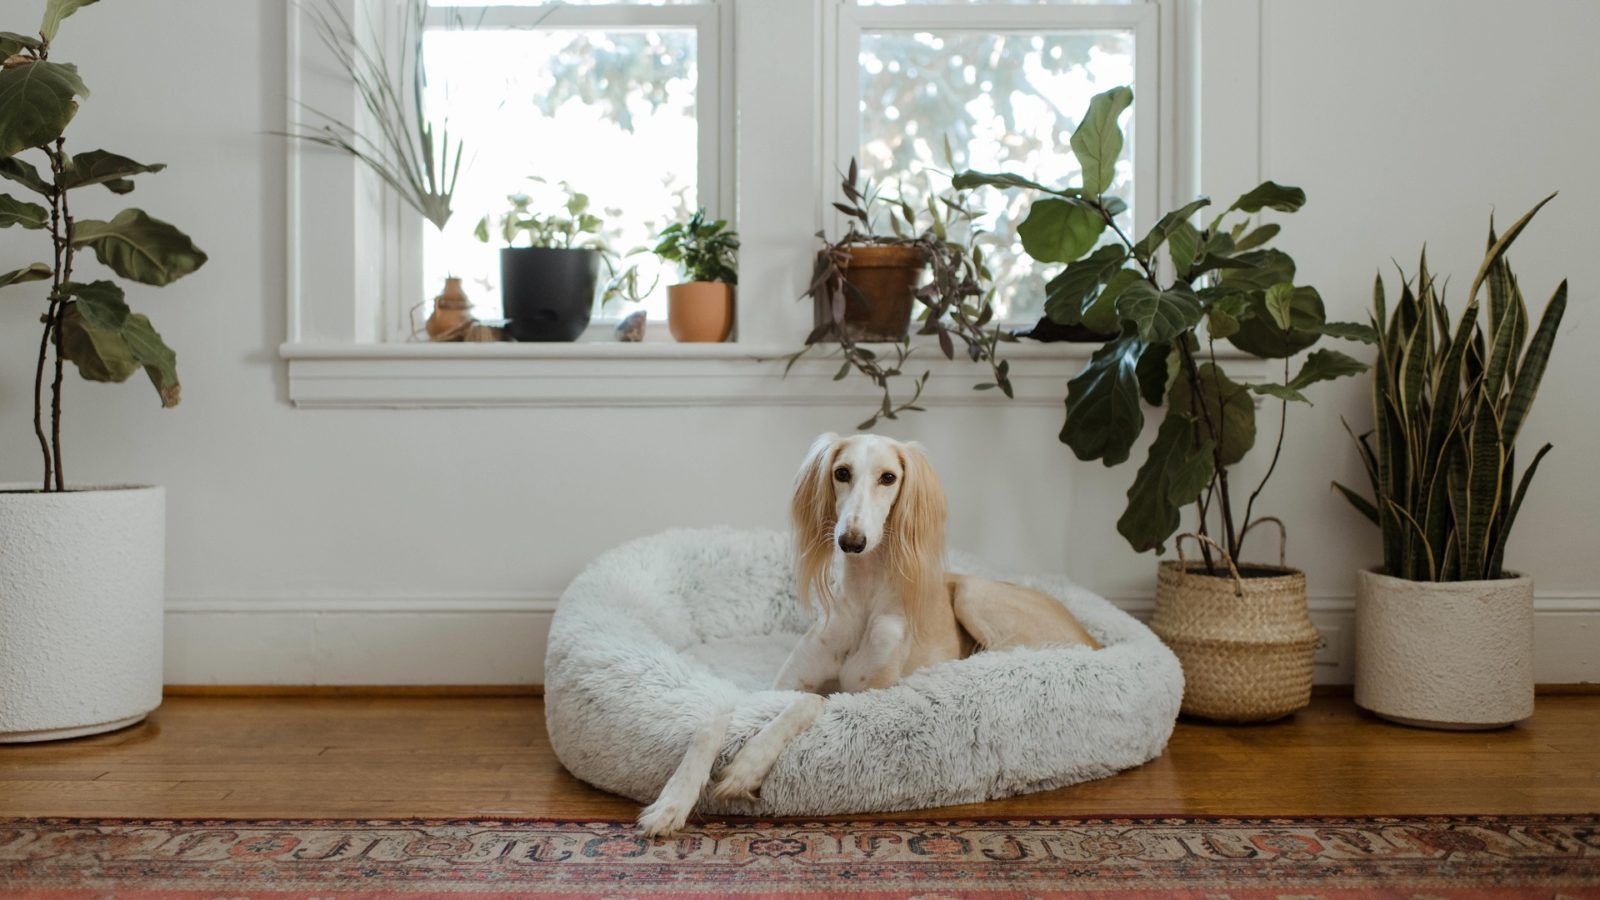 10 indoor plants that are safe for your pets